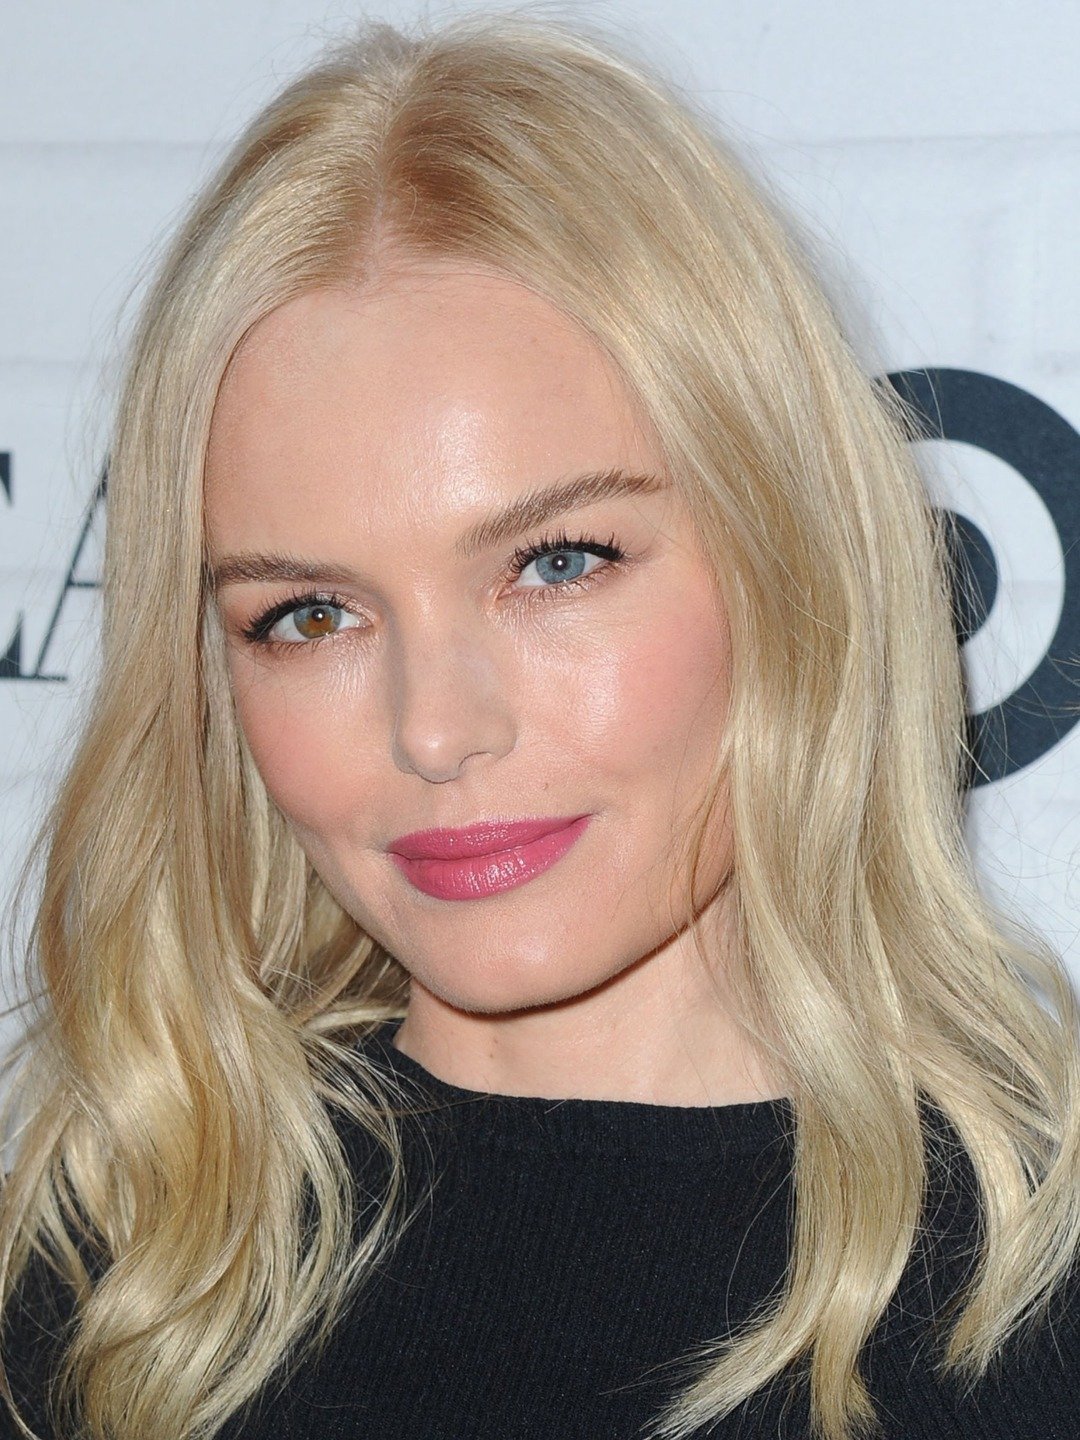 How tall is Kate Bosworth?